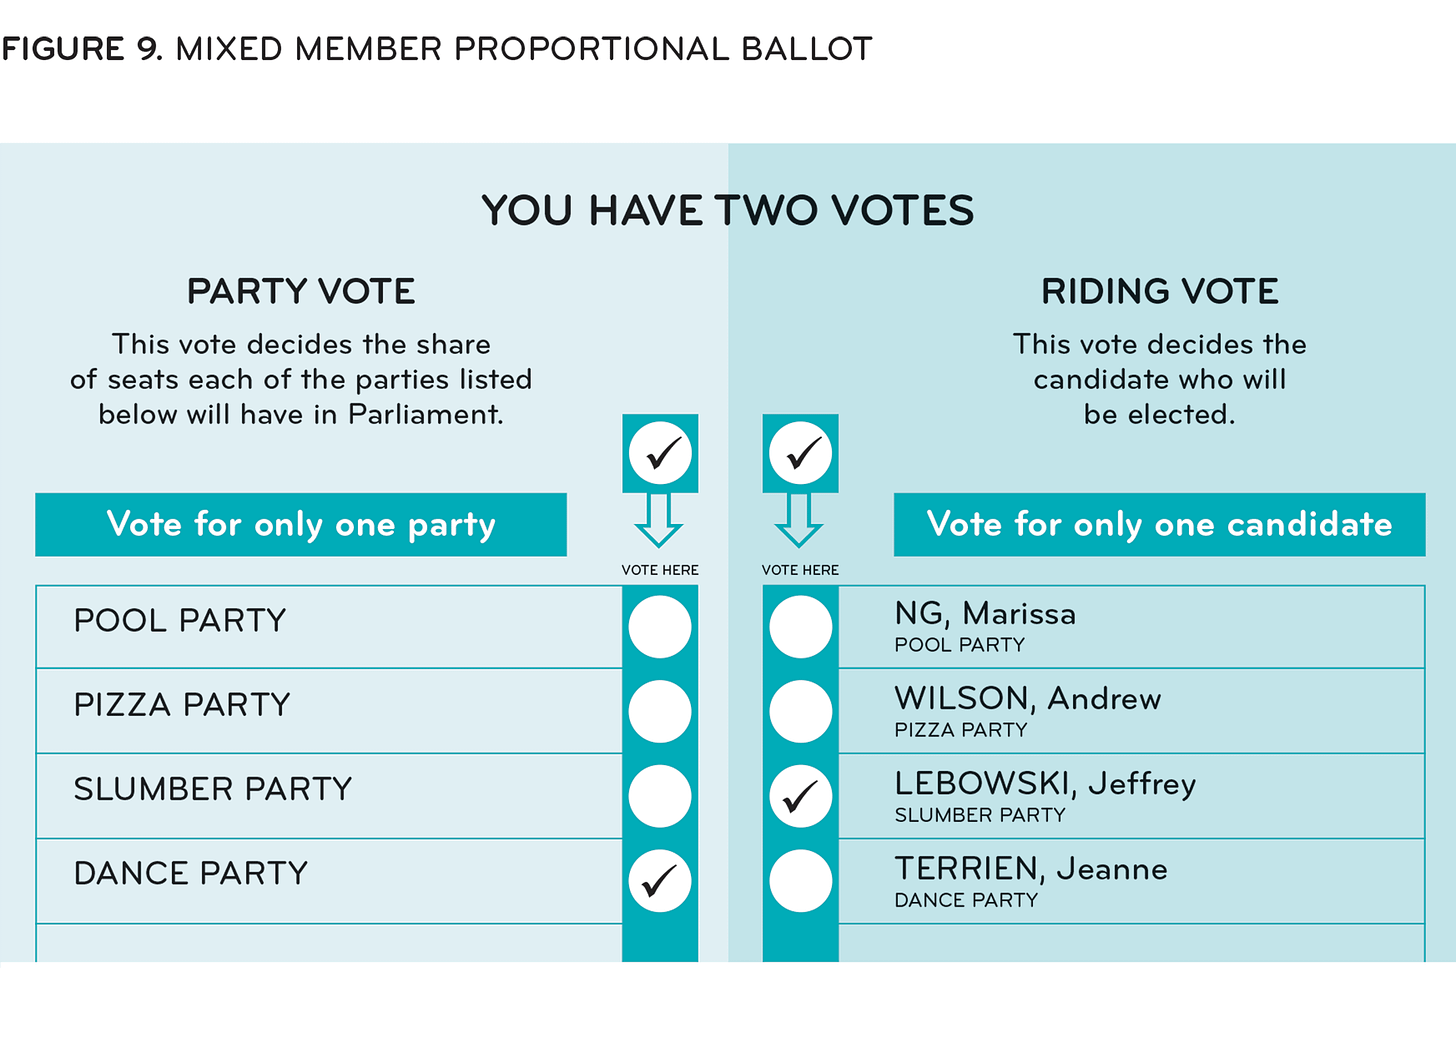 An Electoral System for All - Broadbent Institute